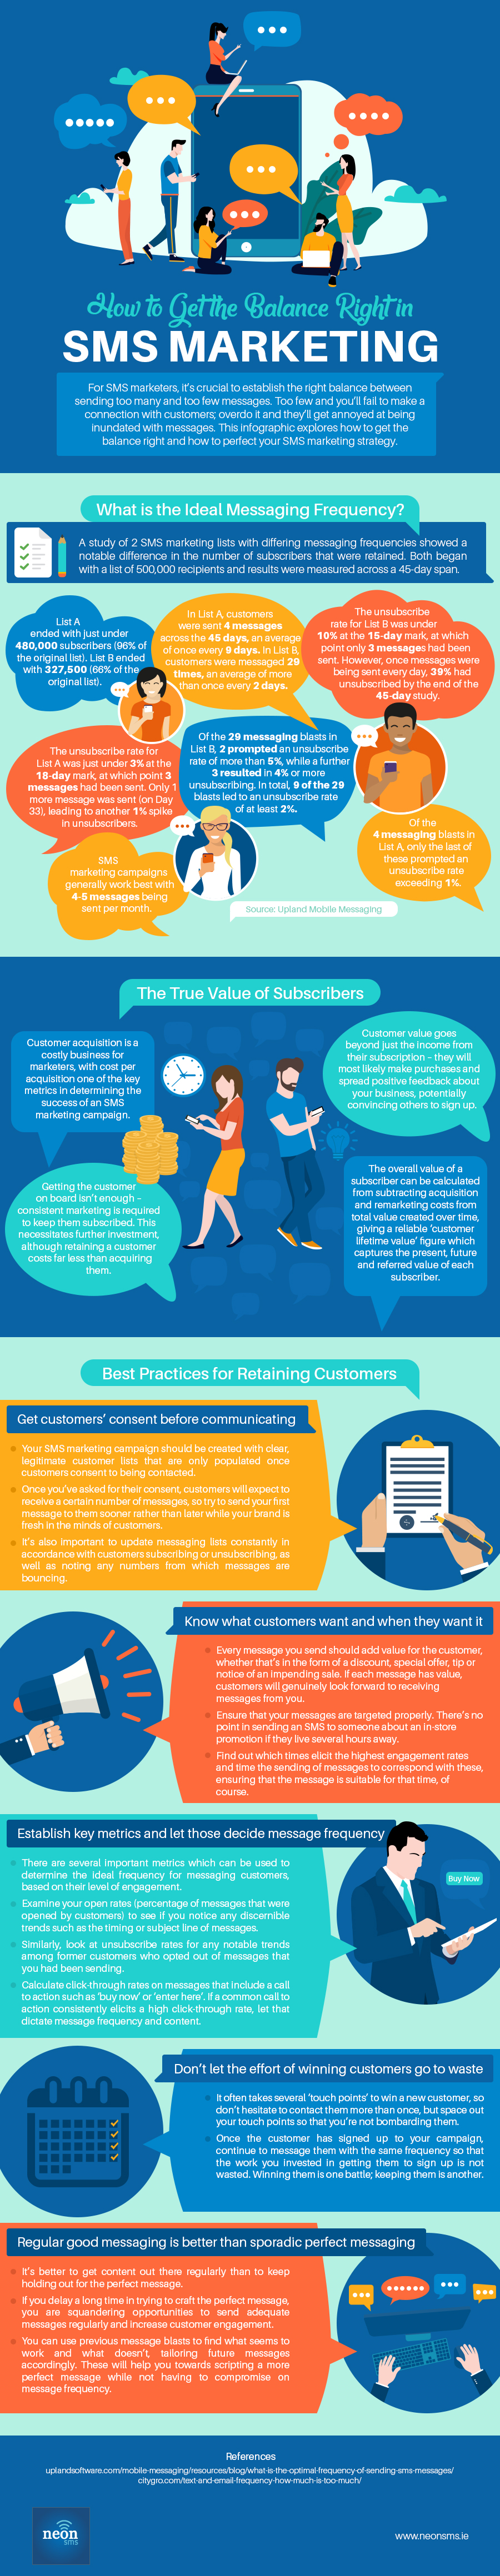 How-to-Get-the-Balance-Right-in-SMS-Marketing-Infographic